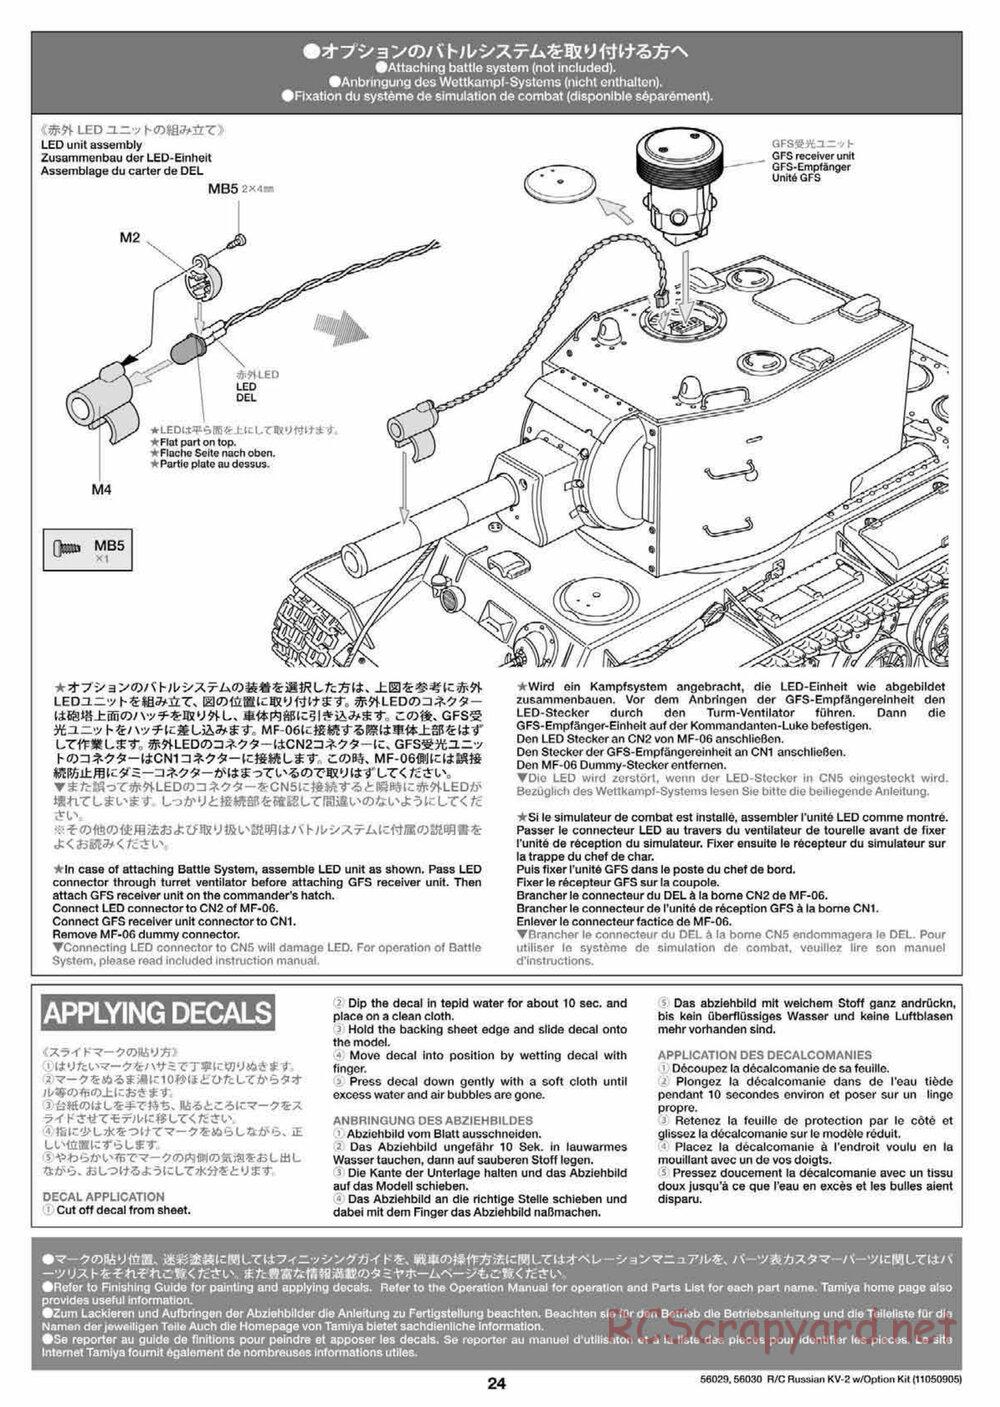 Tamiya - Russian Heavy Tank KV-2 Gigant - 1/16 Scale Chassis - Manual - Page 24